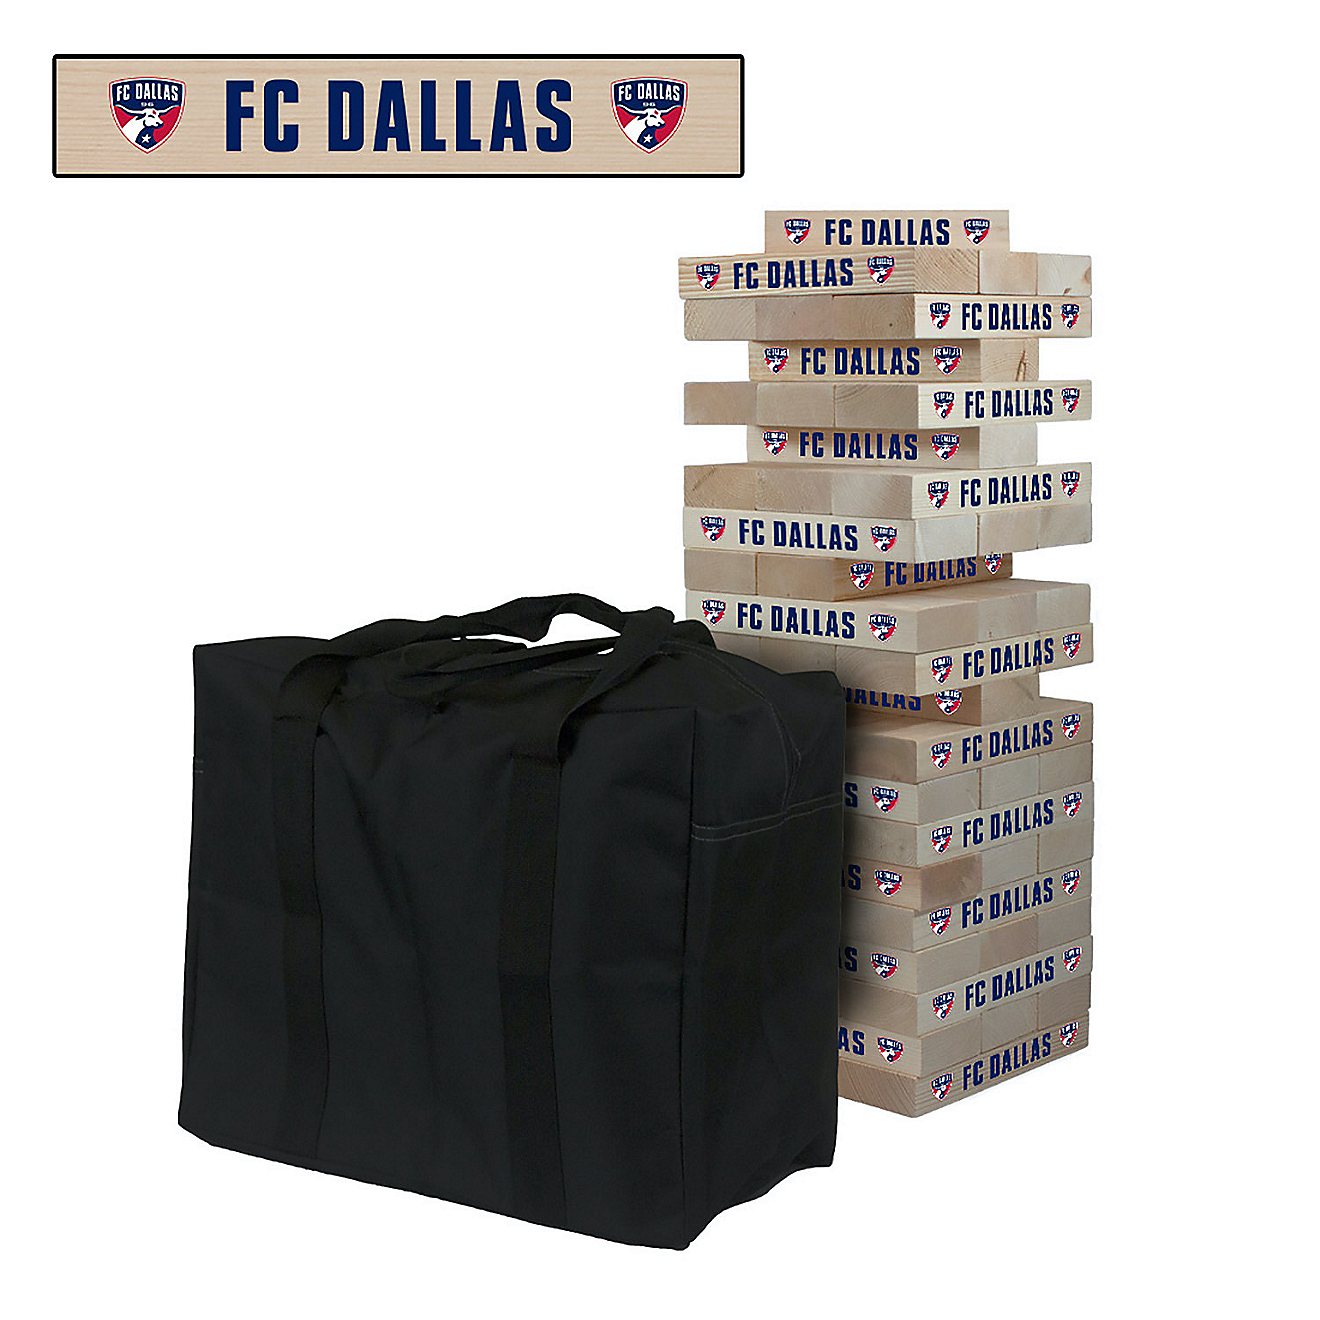 Victory Tailgate FC Dallas Giant Wooden Tumble Tower Game                                                                        - view number 1